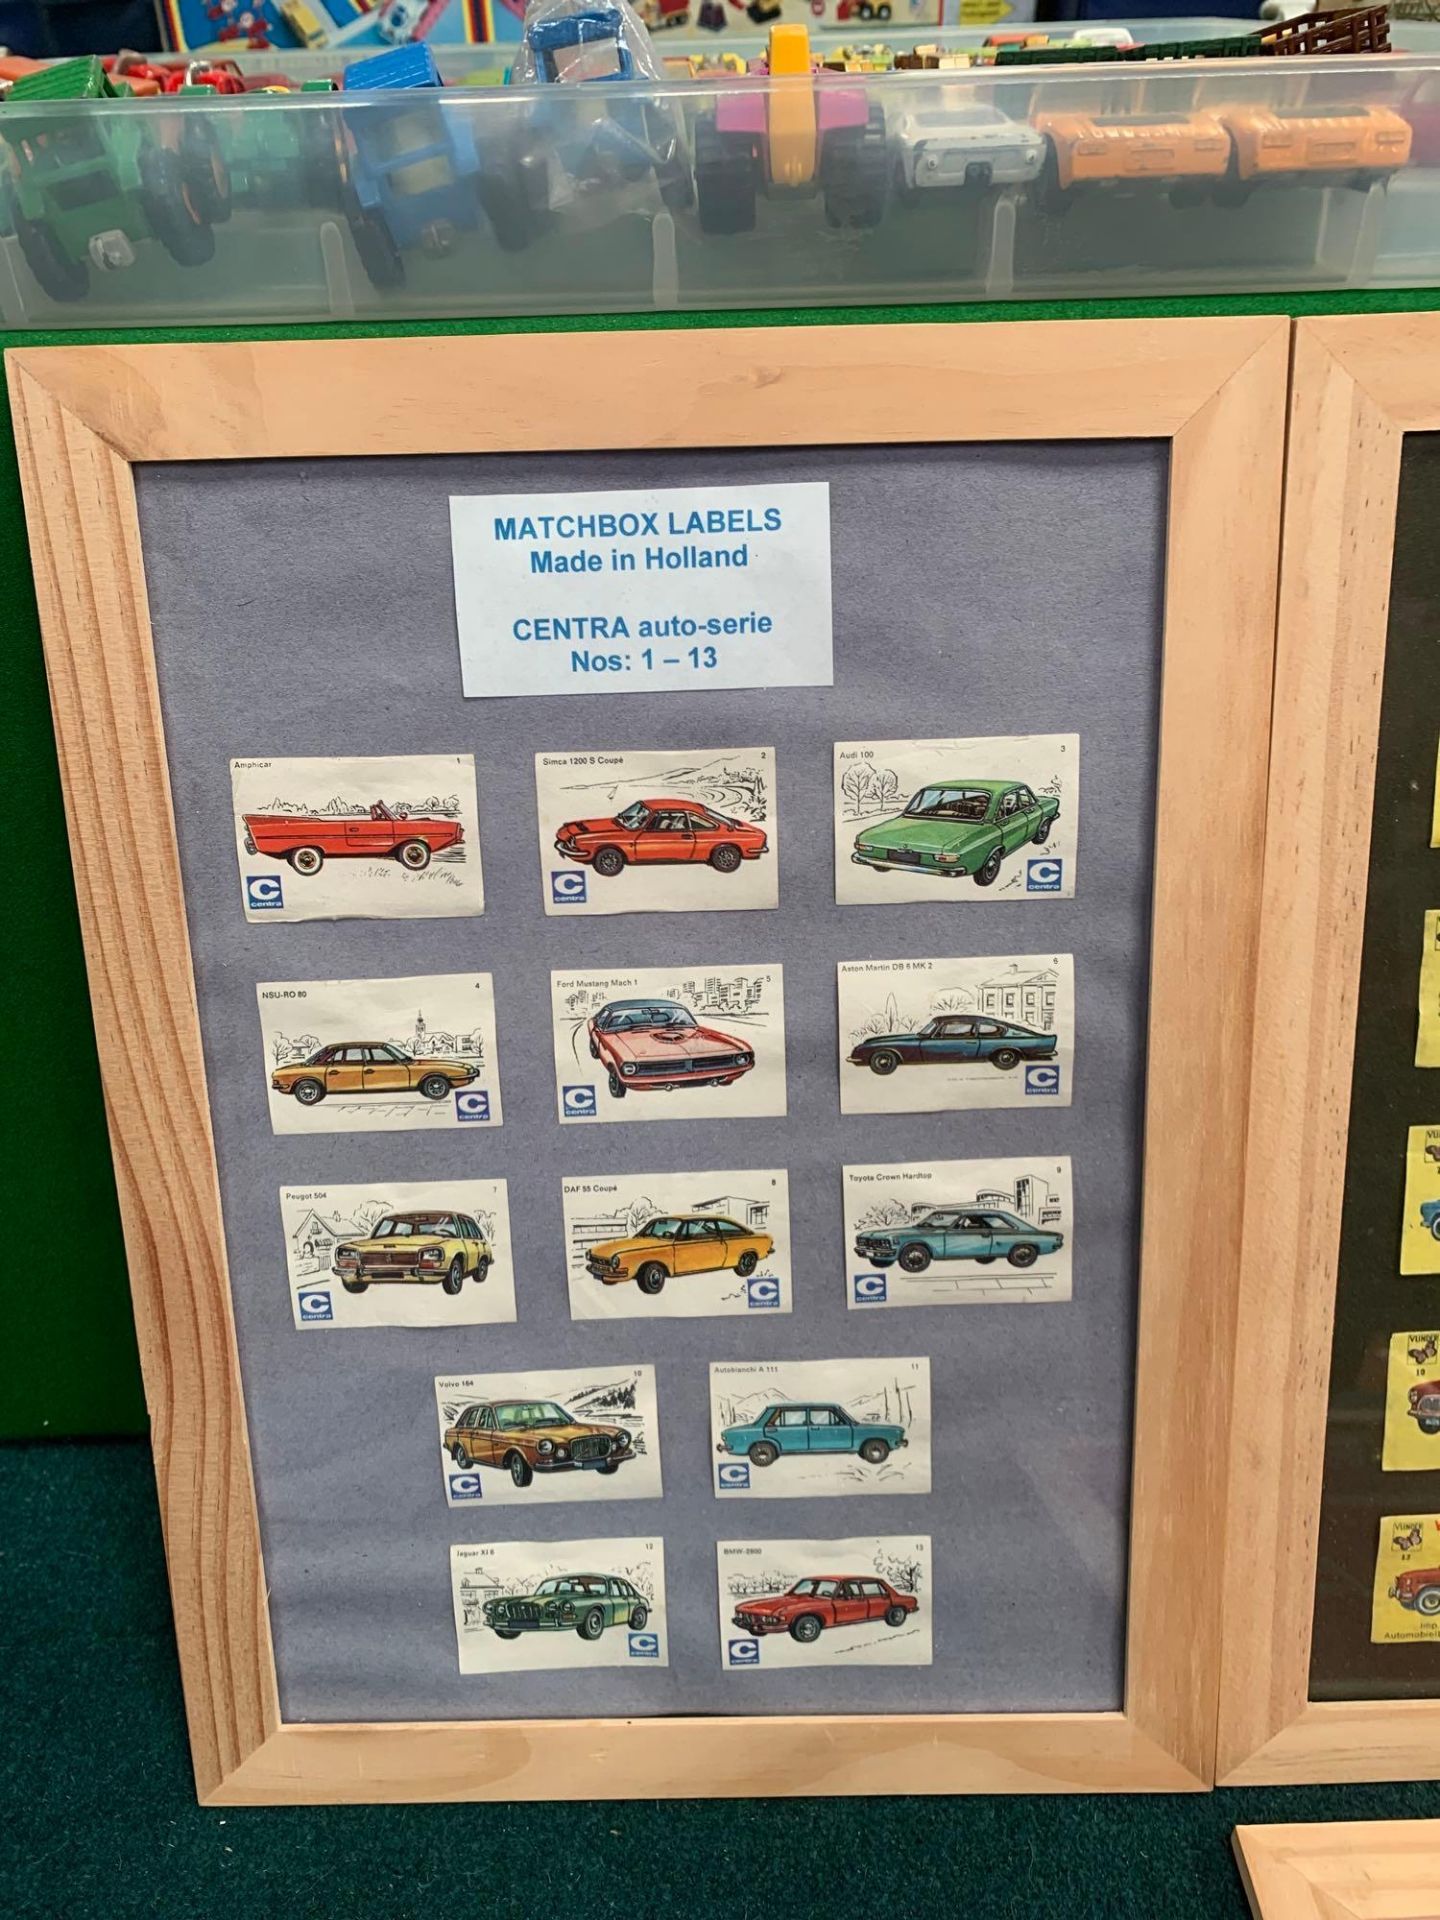 6 X Framed Matchbox Labels Made In Holland. - Centra Auto Series 1-13 Centra Auto Series 14 - 25 - Image 3 of 11